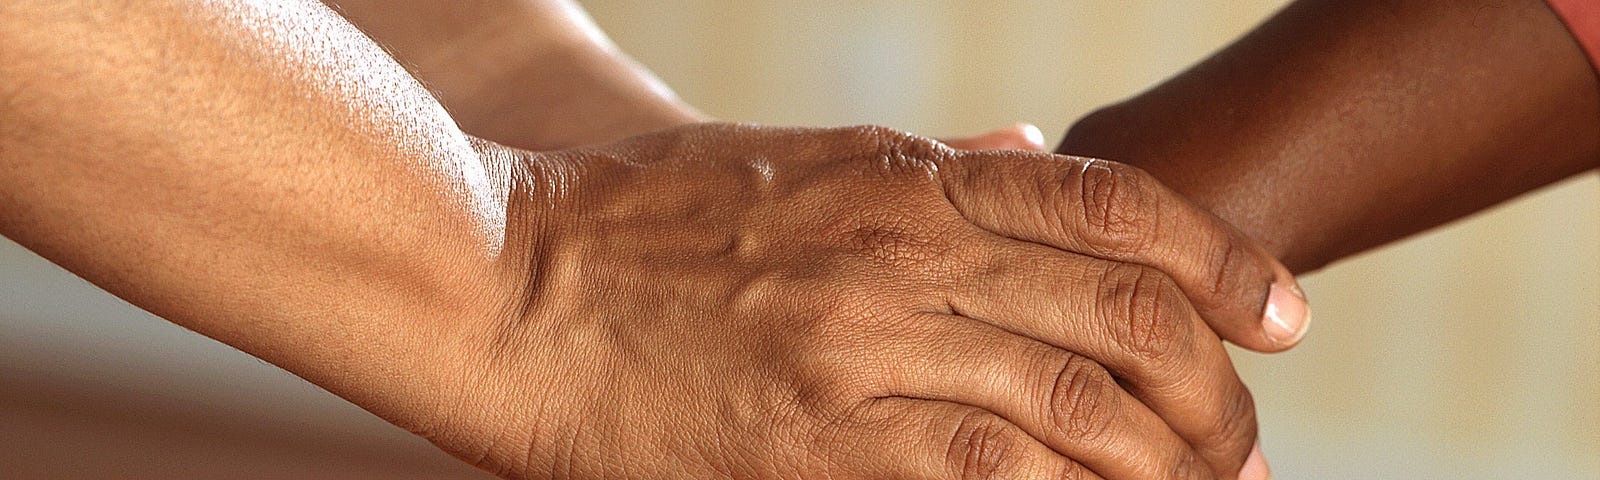 closeup of two peoples’ hands clasped lightly together in a way suggesting emotional closeness